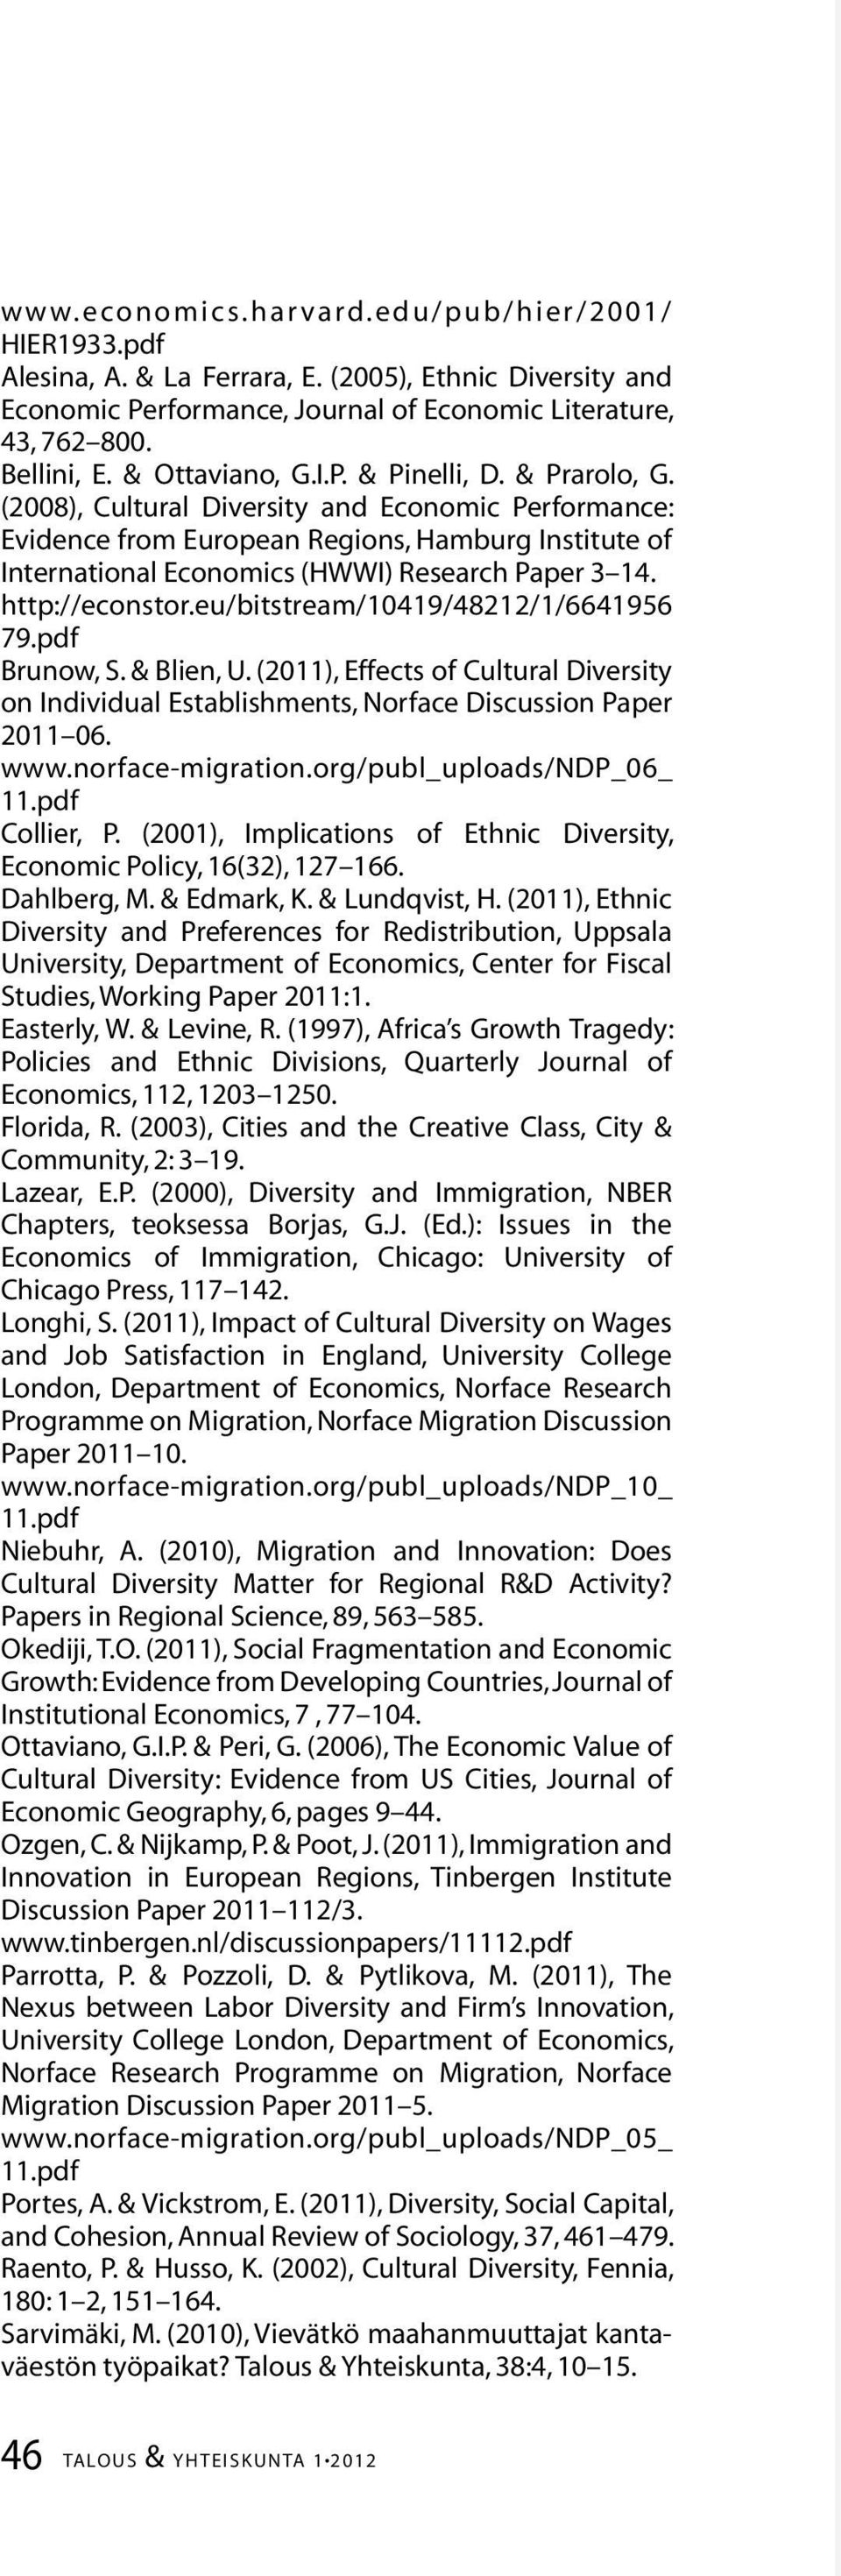 (2008), Cultural Diversity and Economic Performance: Evidence from European Regions, Hamburg Institute of International Economics (HWWI) Research Paper 3 14. http://econstor.